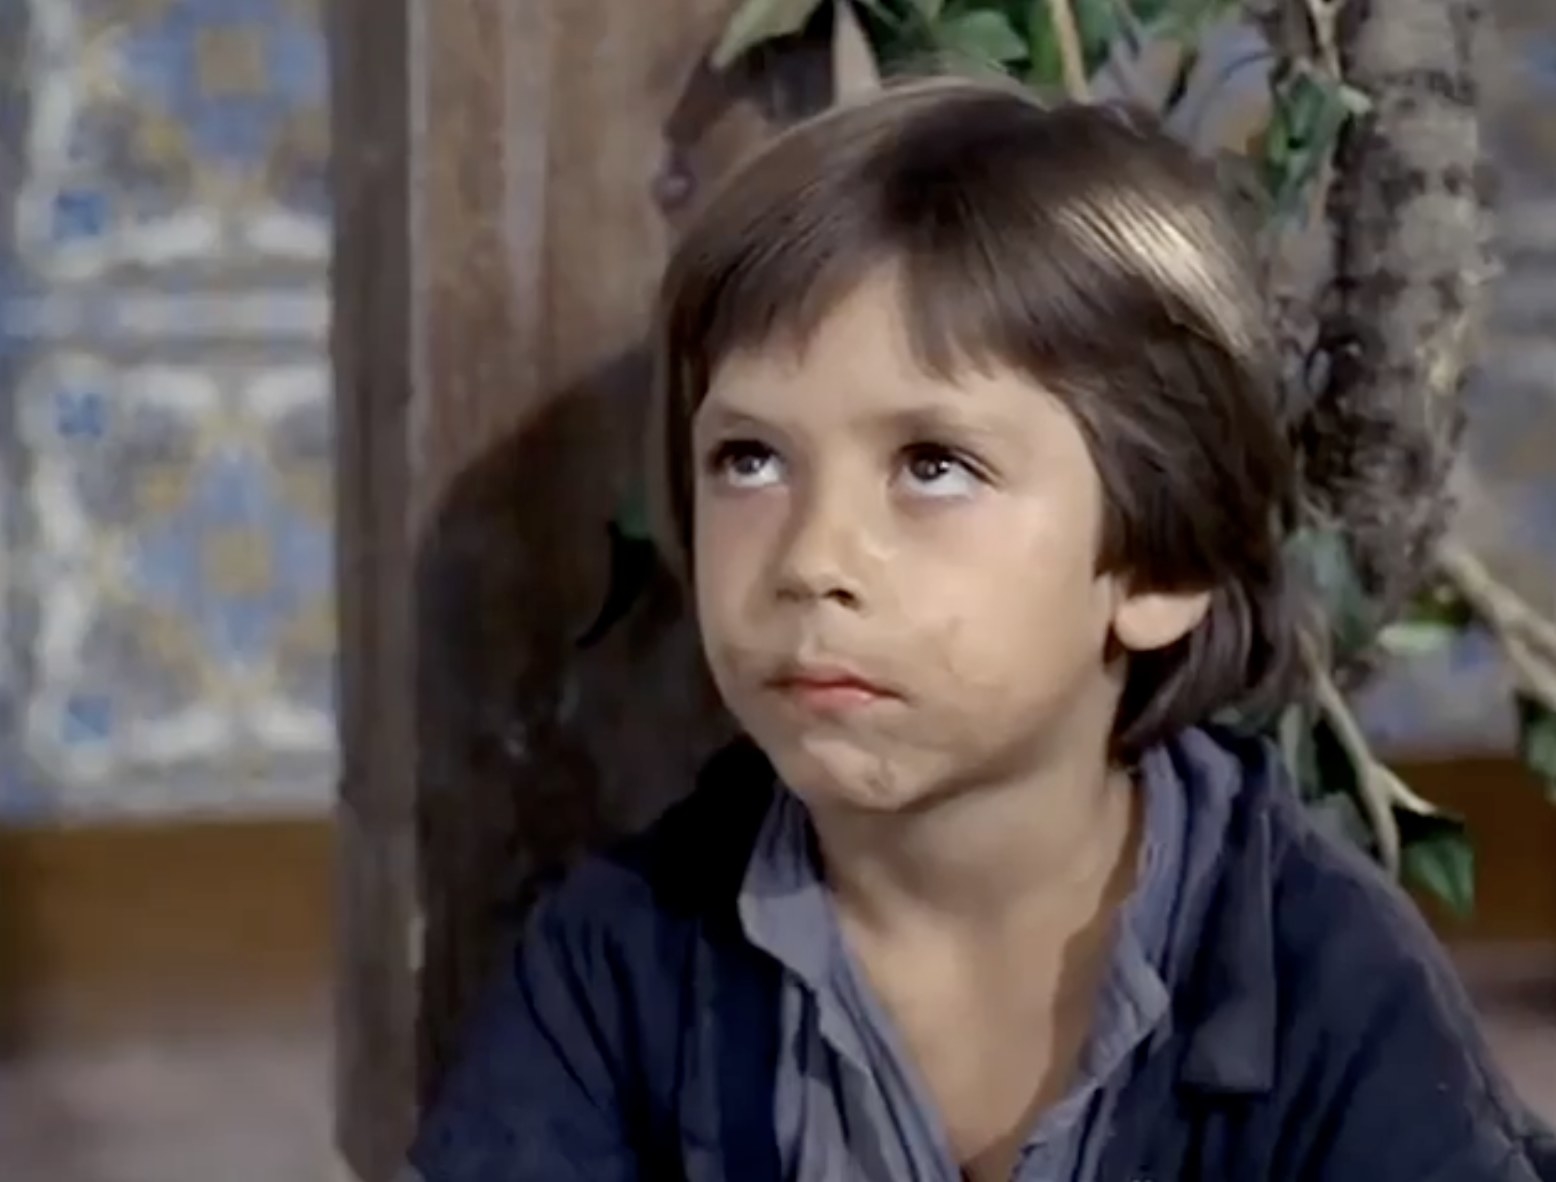 Javier Bardem as a little boy looking sad with dirt on his face